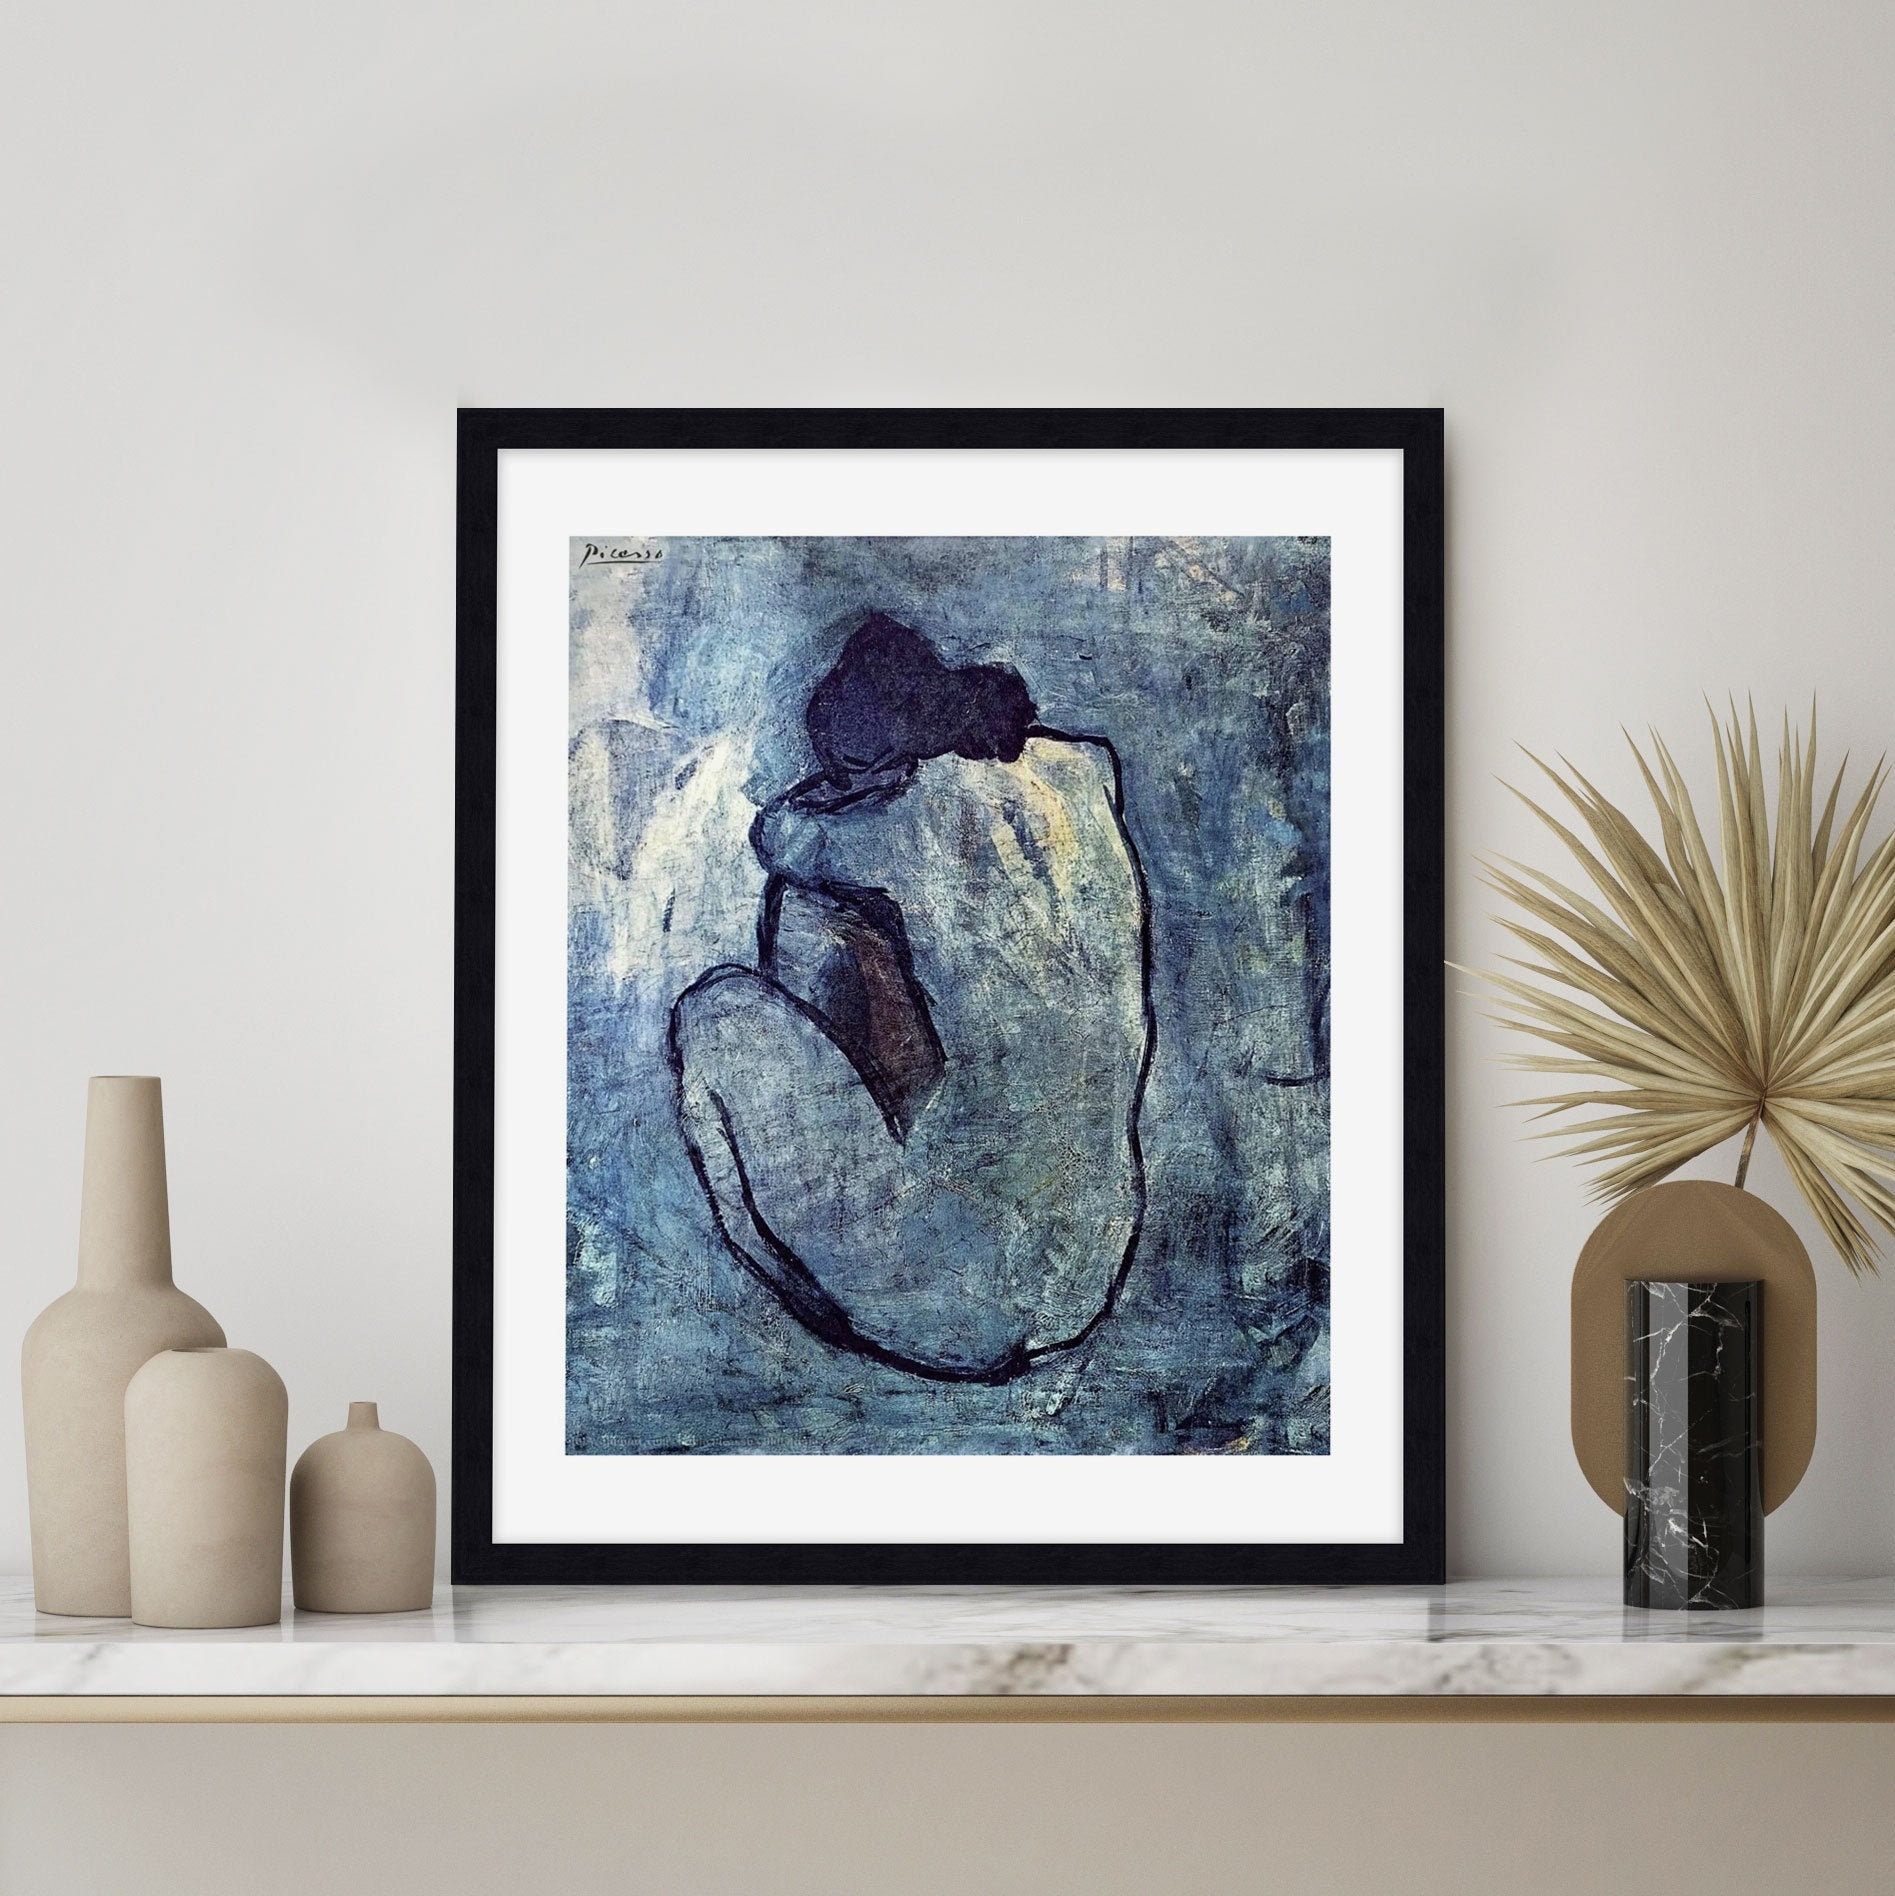 Blue Nude by Pablo Picasso Art Print -  Sweden